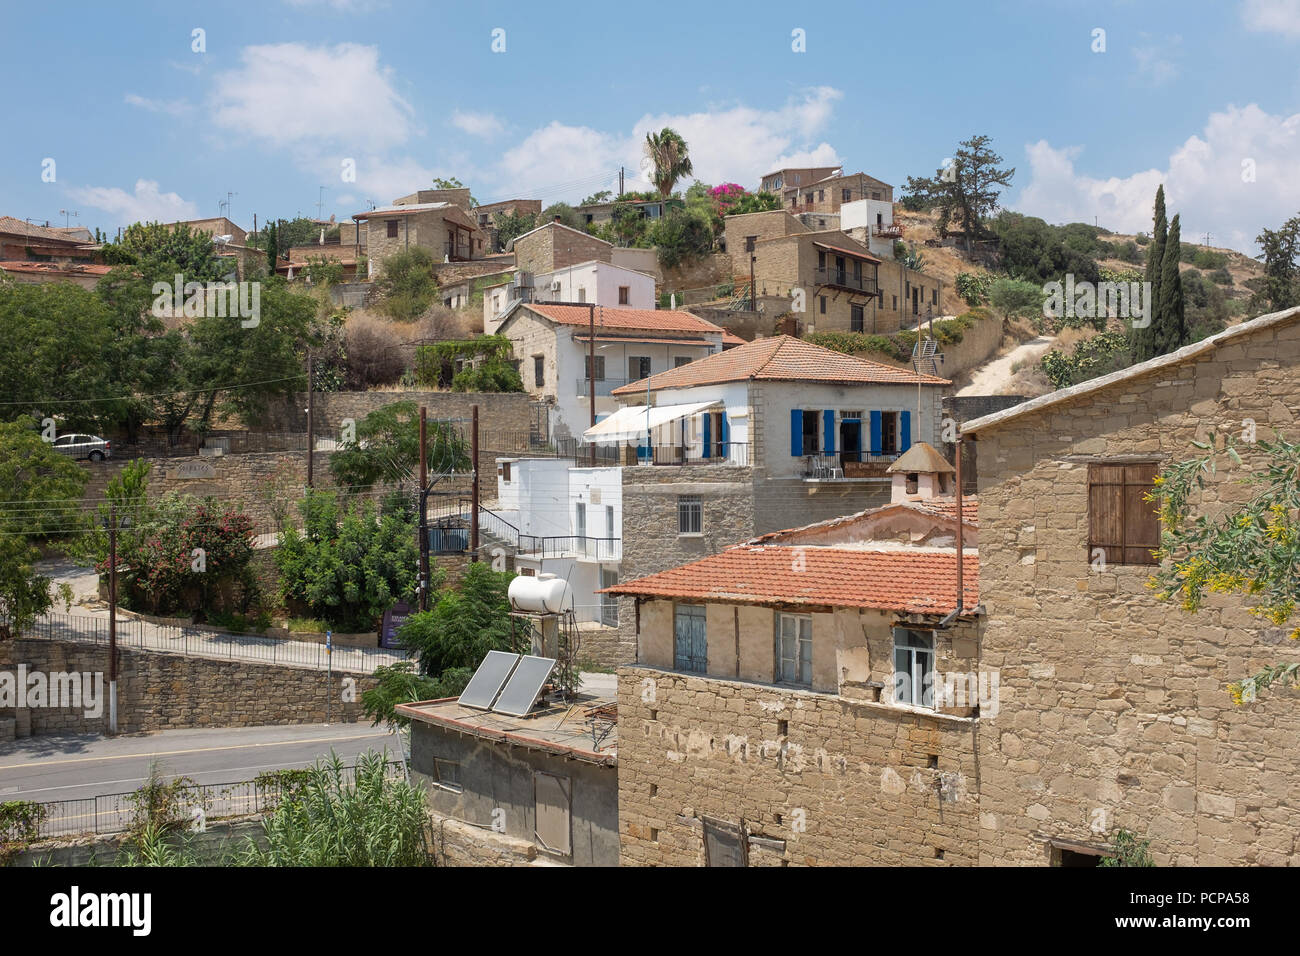 Picturesque village of Tochni set in the Larnaca region of Cyprus Stock Photo